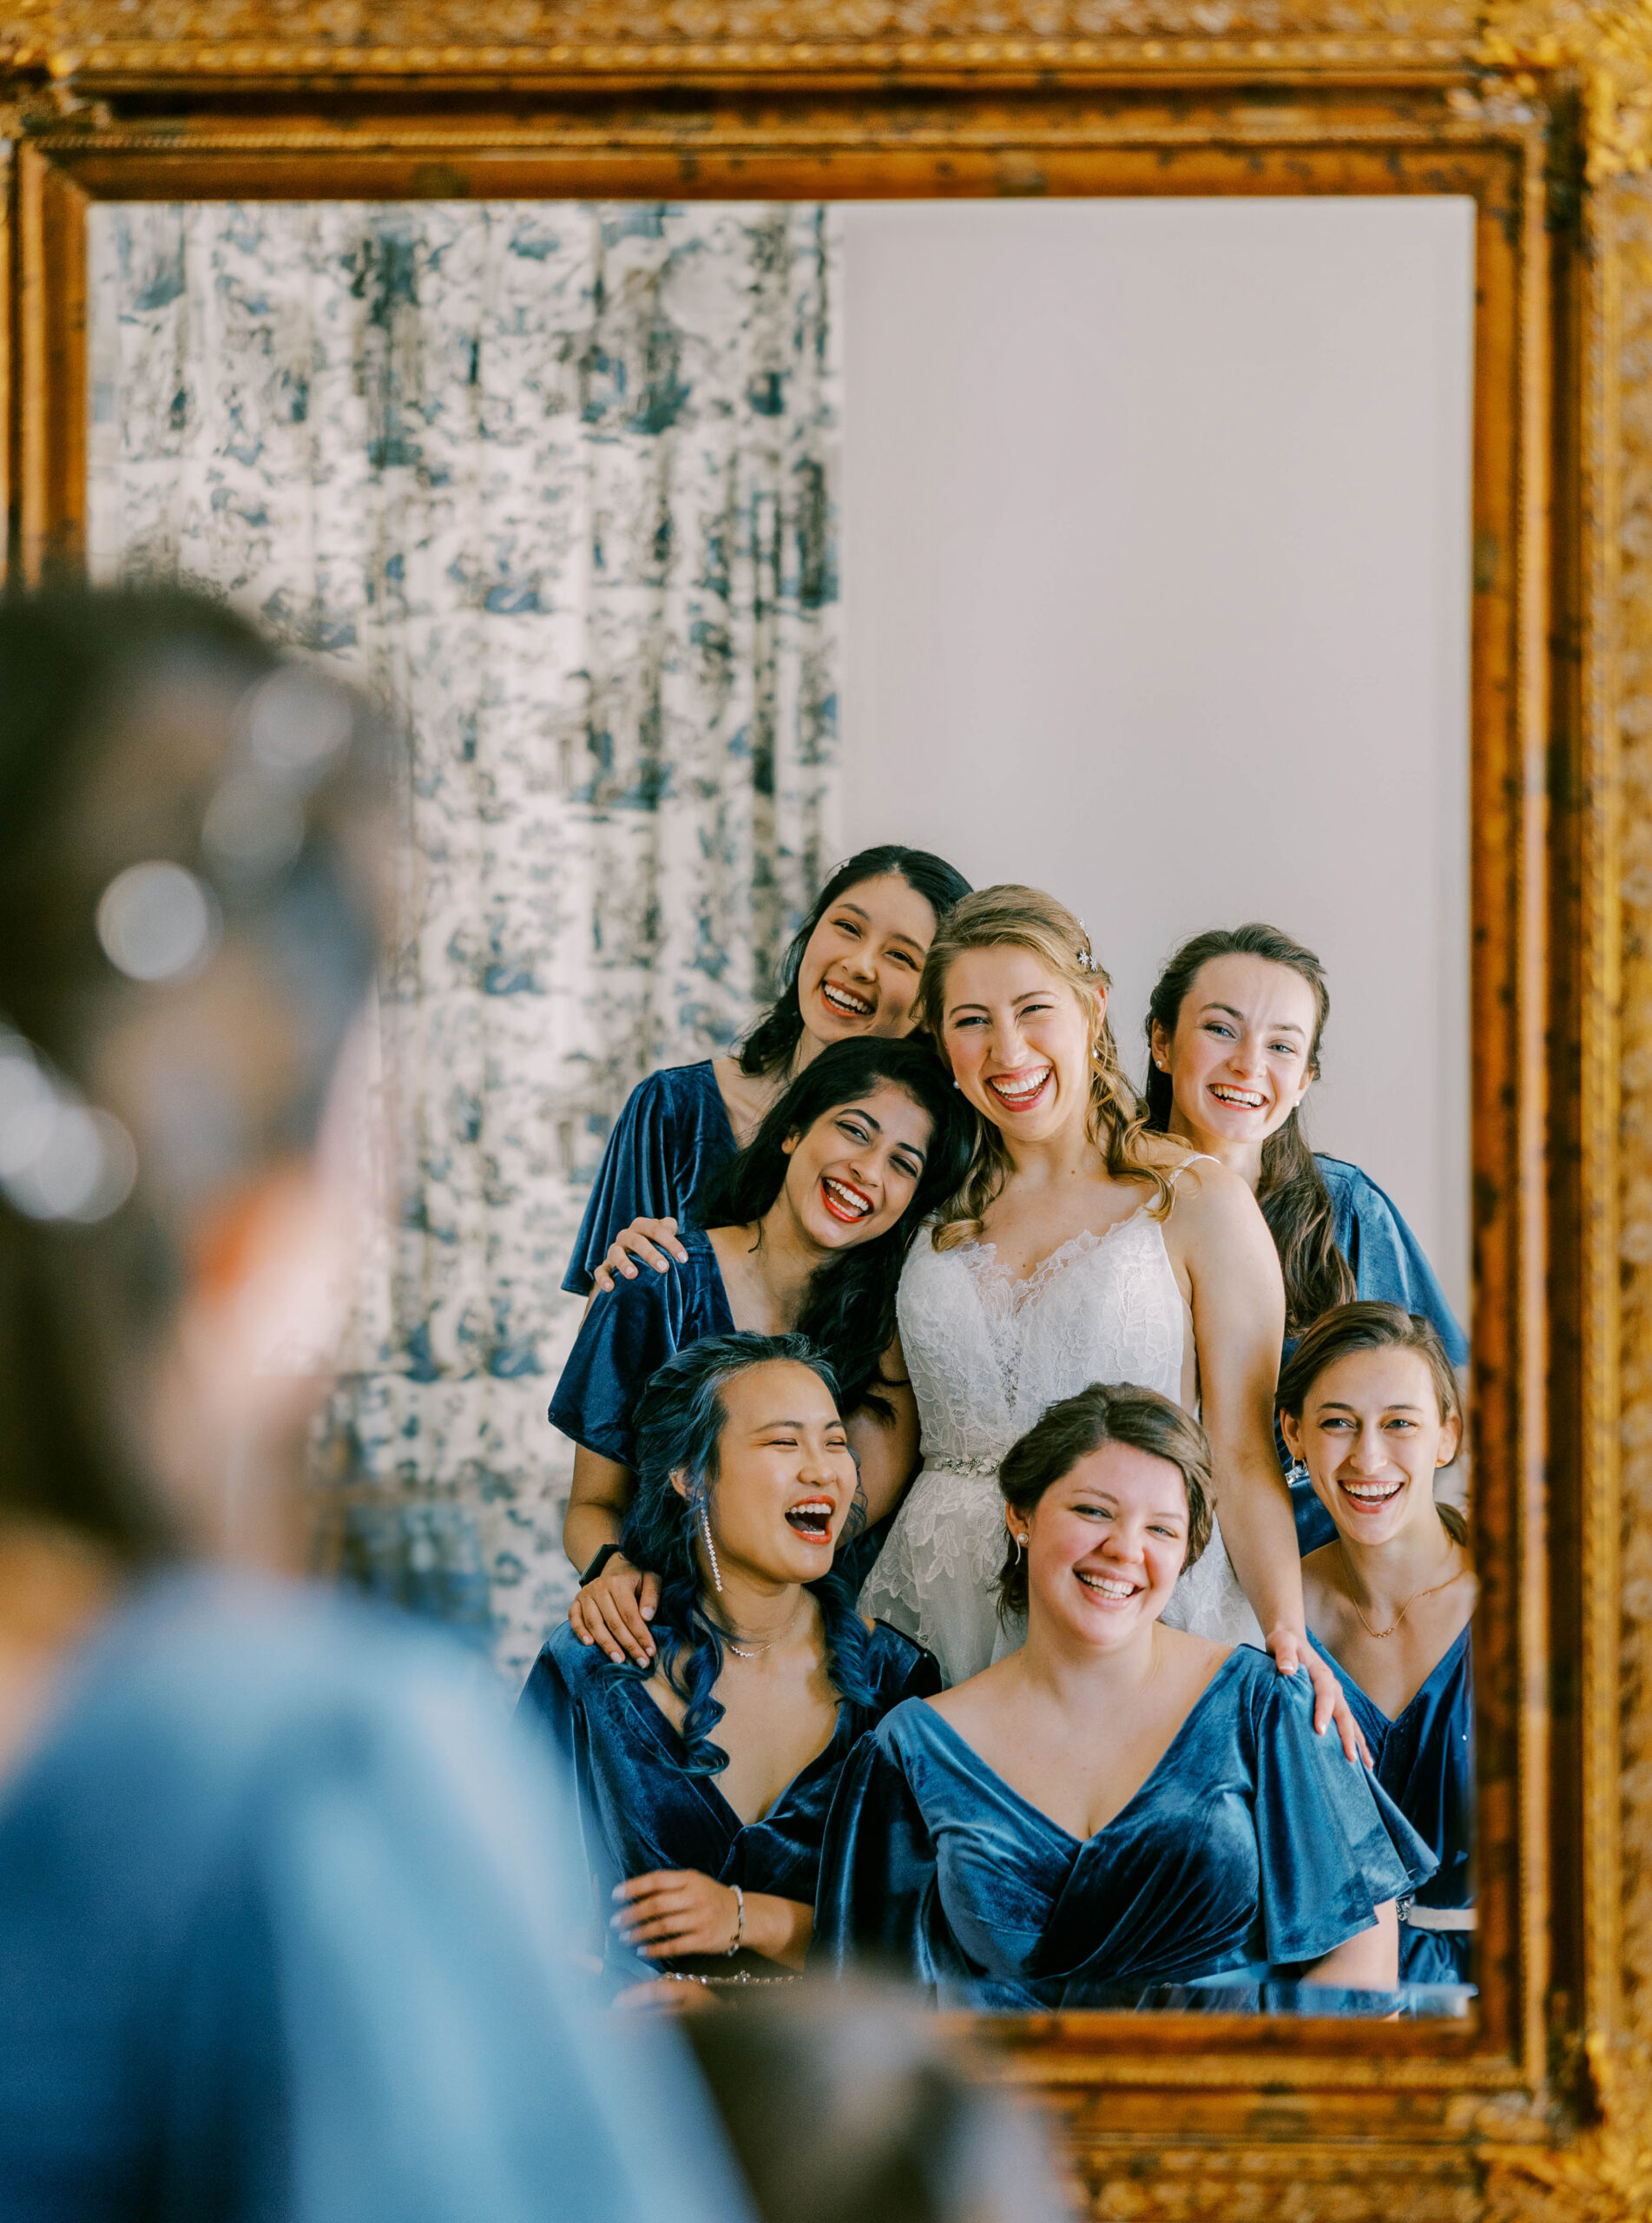 bridesmaids pose for a photo in a mirror framed on the wall of the bridal suite